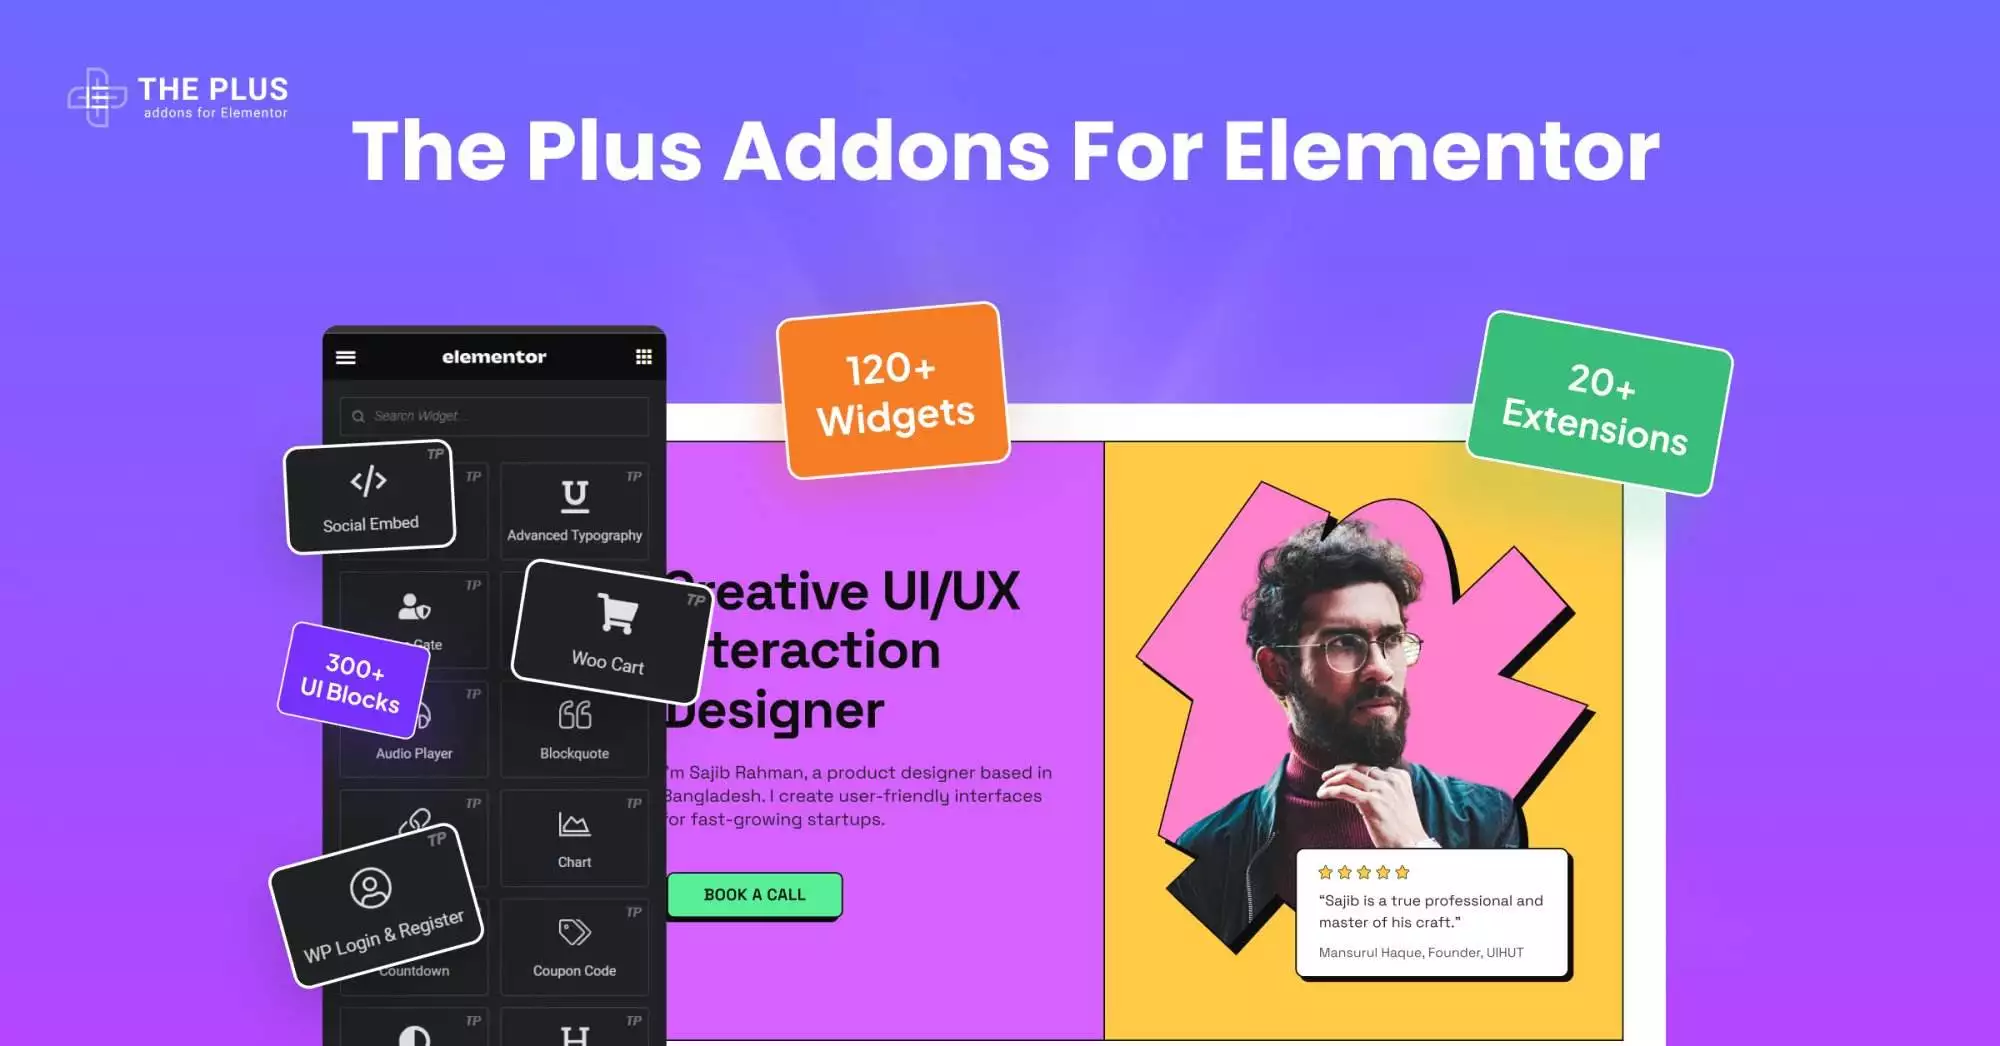 Tpae home best 120+ elementor widgets - free elementor addon from the plus addons for elementor